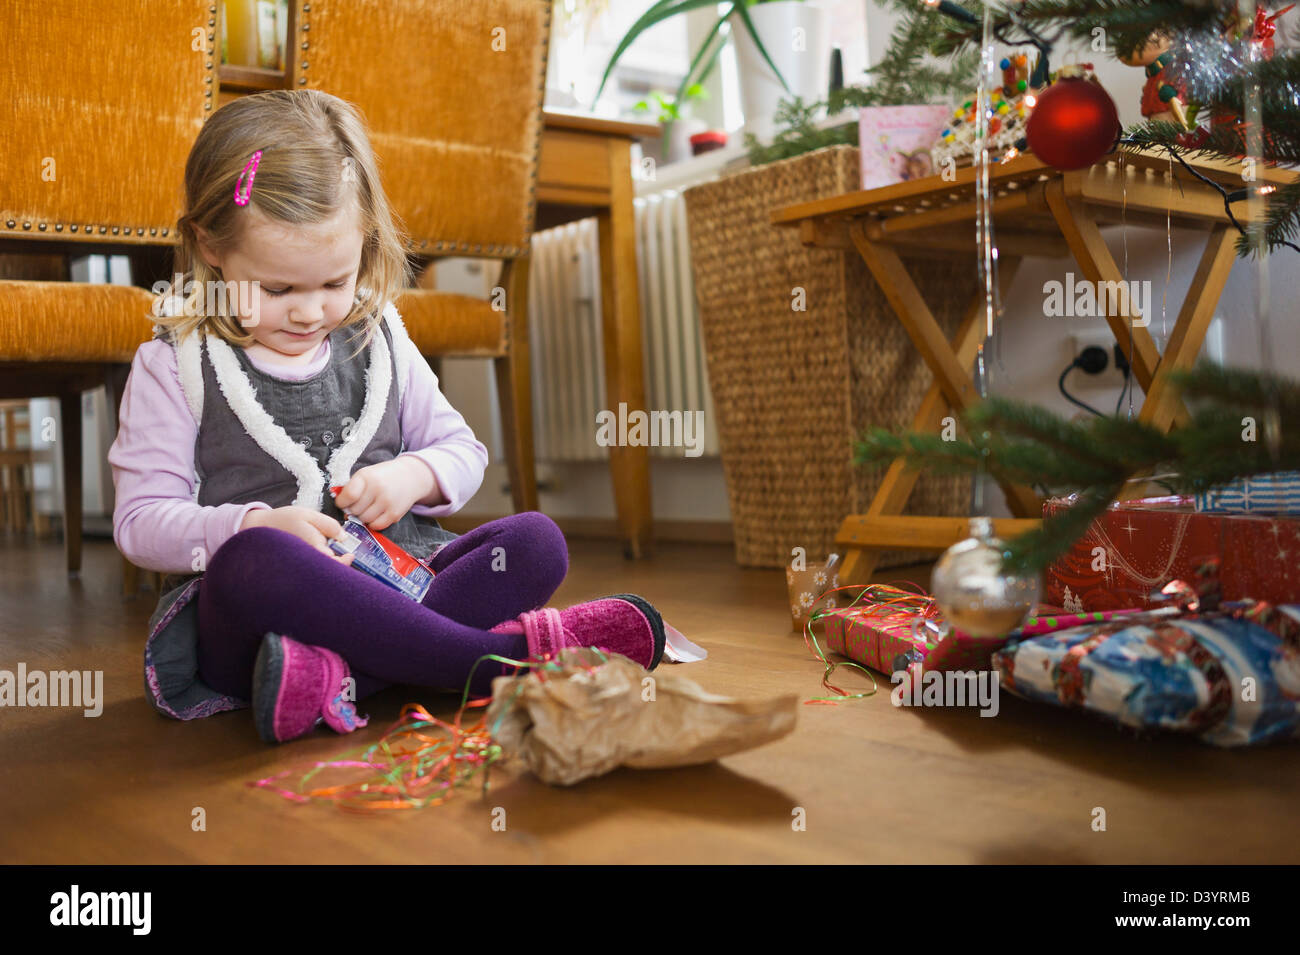 Girl on at Home Opening Christmas Present, Germany Stock Photo